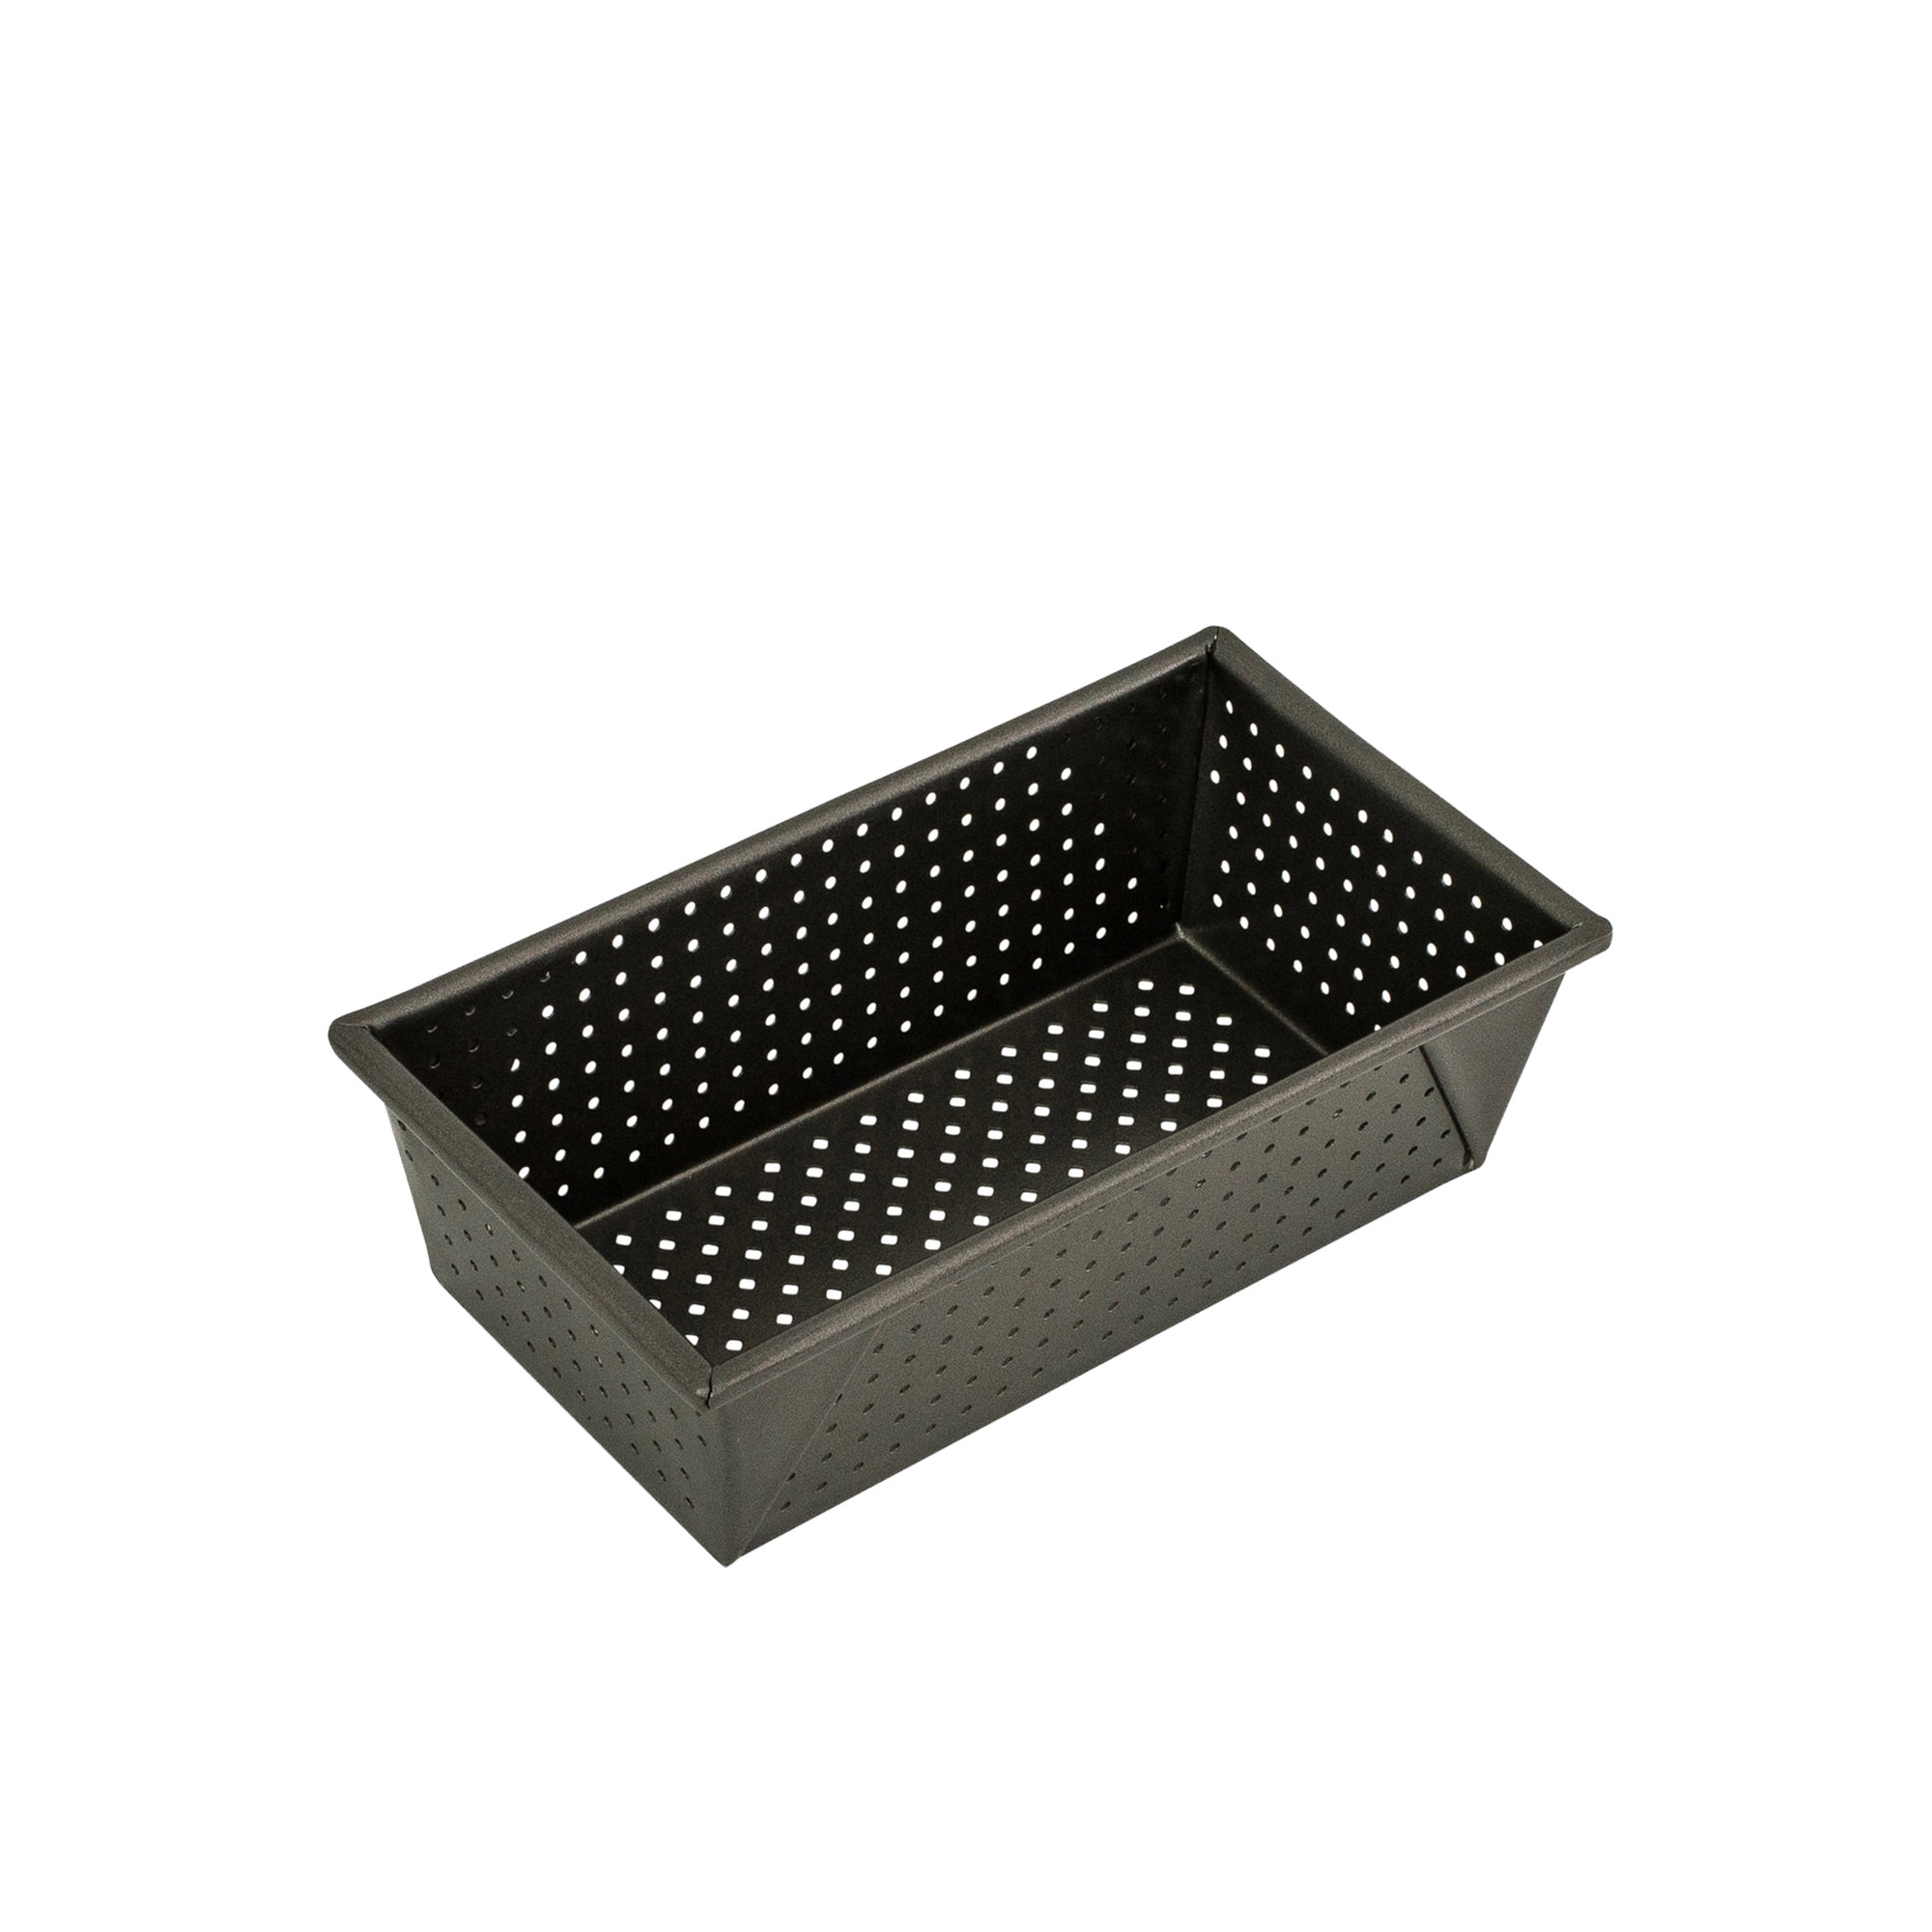 Bakemaster Non Stick Perfect Crust Box Sided Loaf Pan 22x12cm Image 1